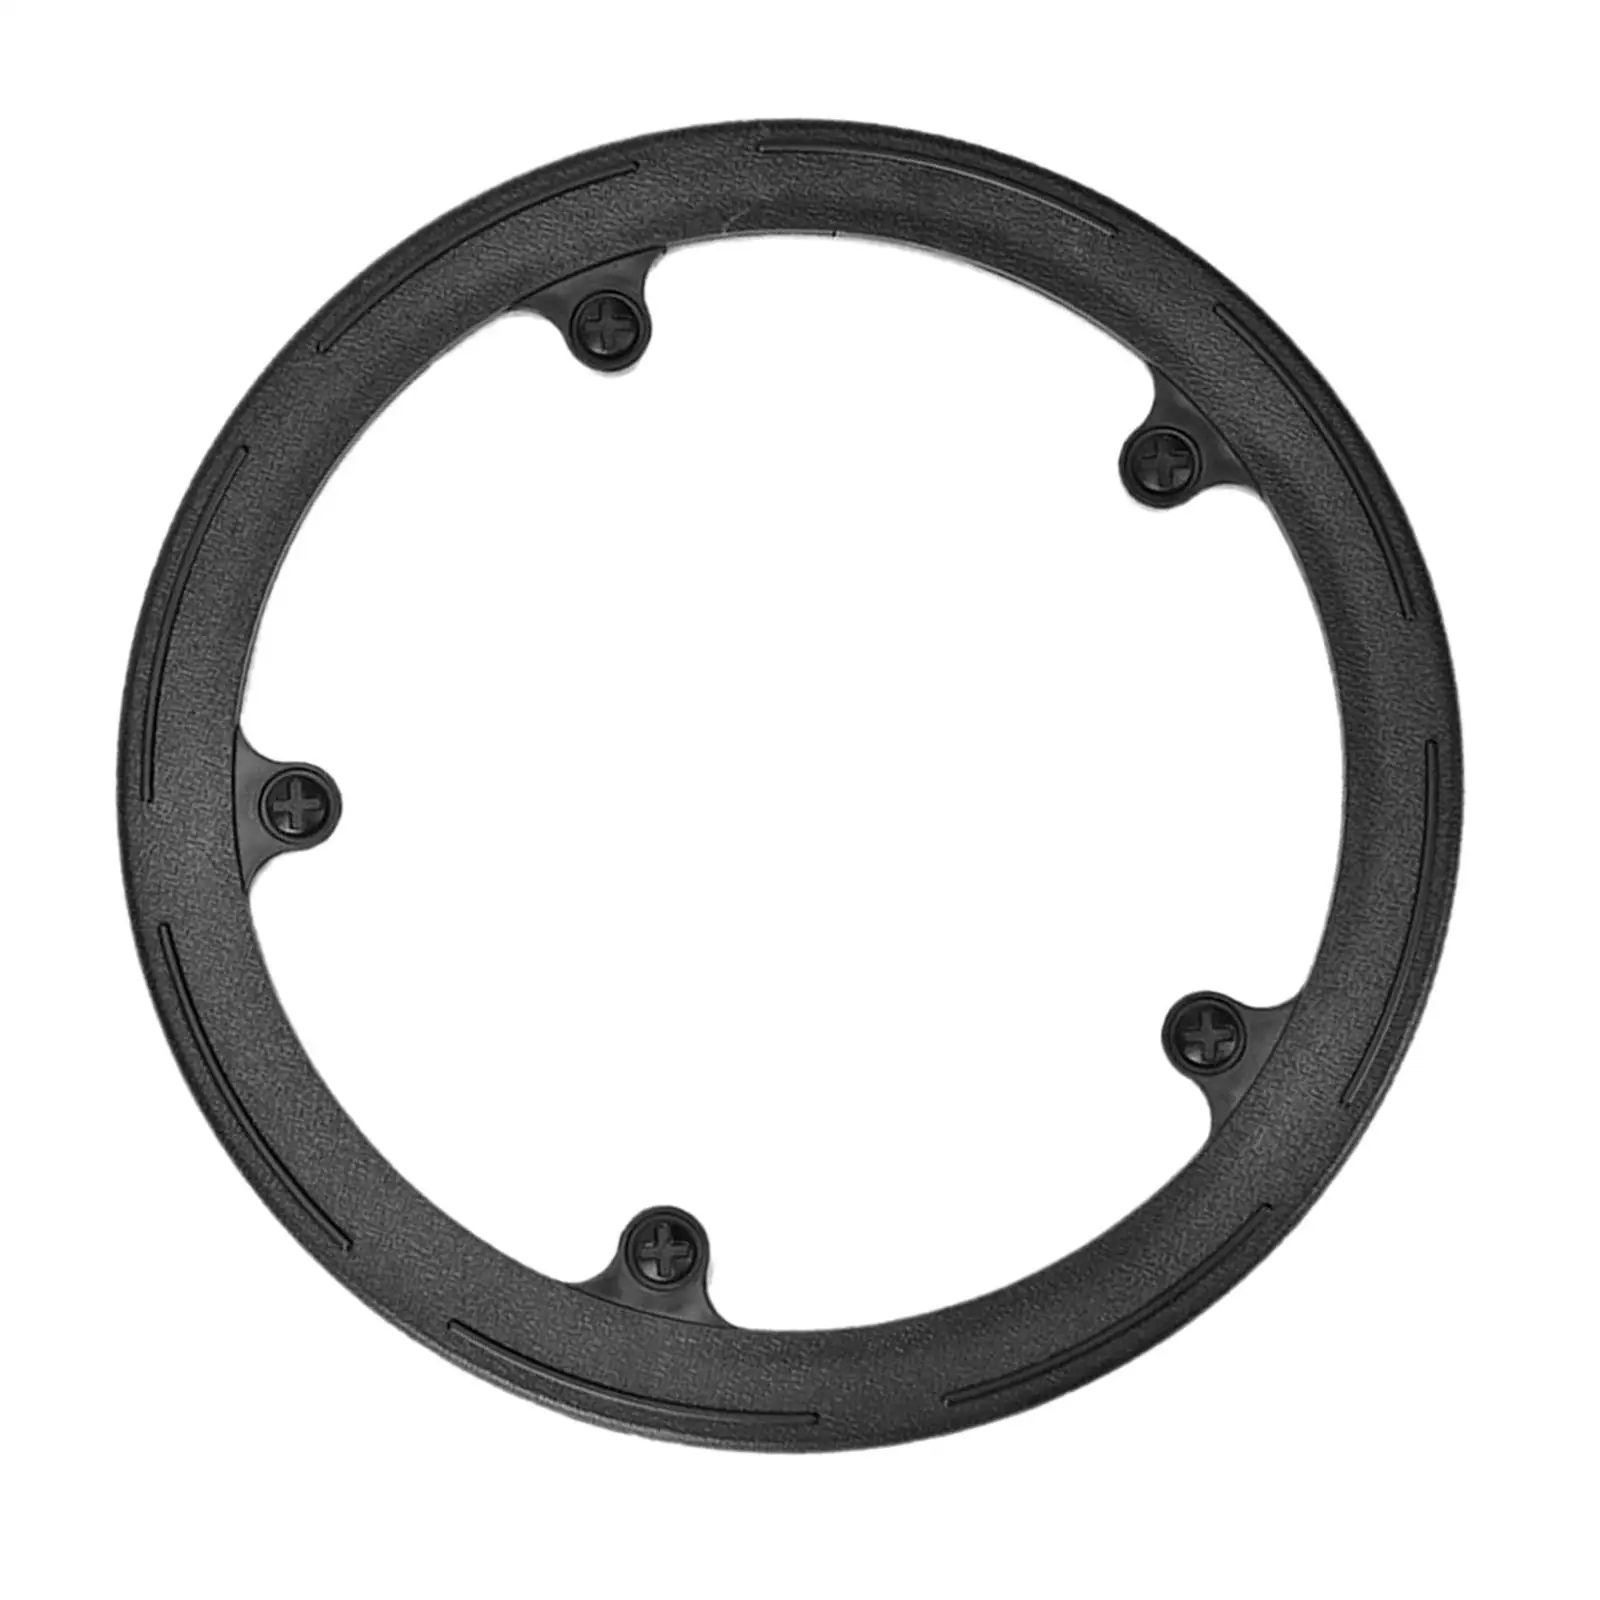 Bike Chain Wheel Protector Chainring for Repair Parts